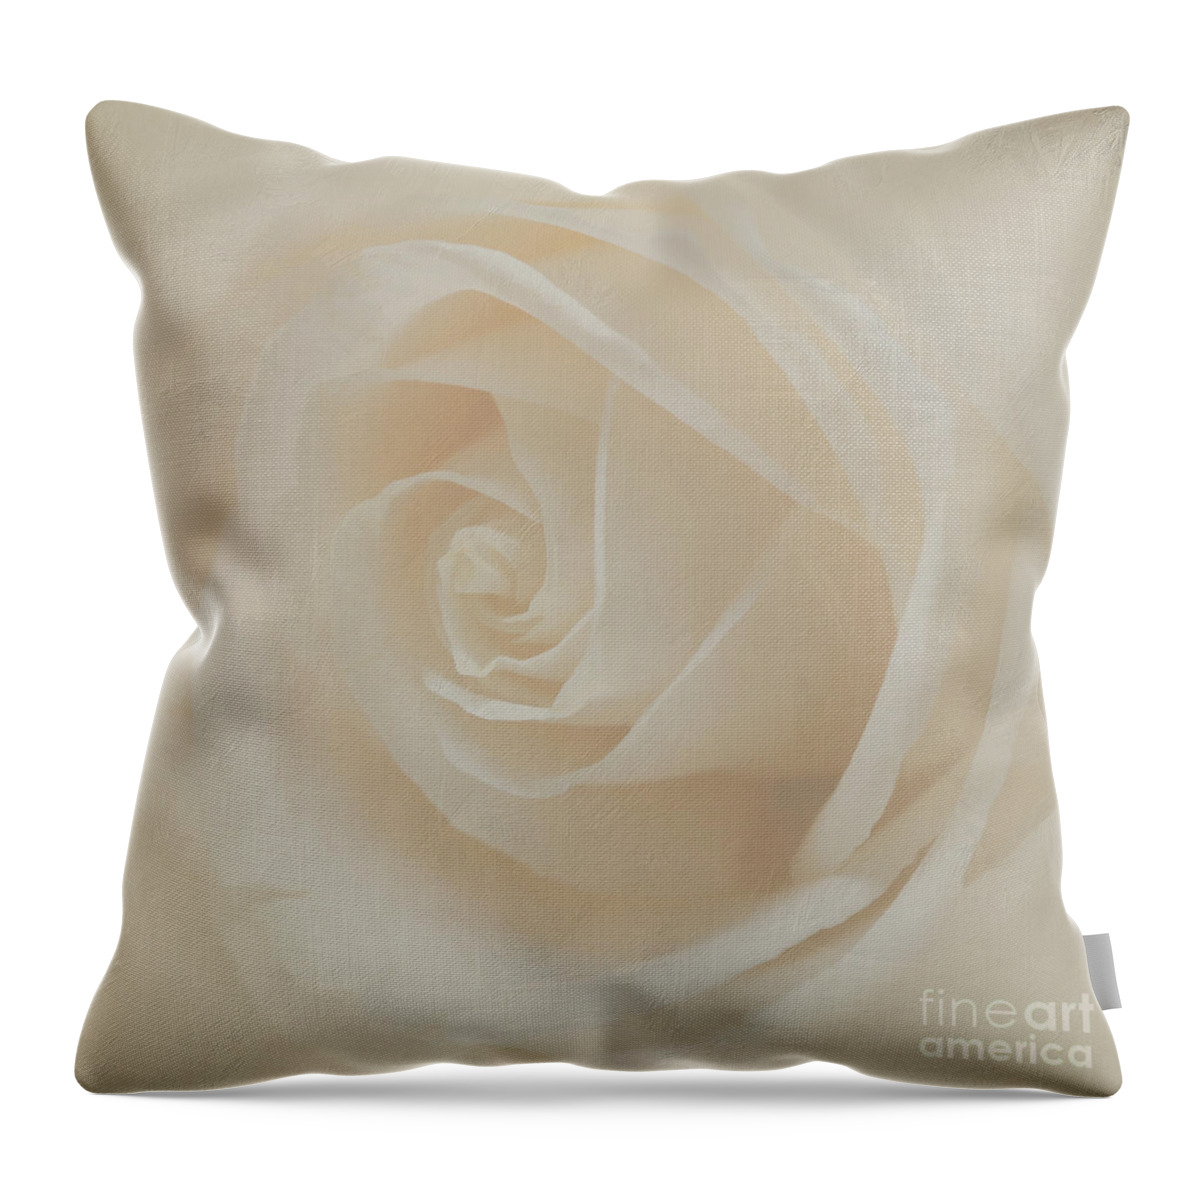 Rose Throw Pillow featuring the digital art Sweet Dreams by Jayne Carney